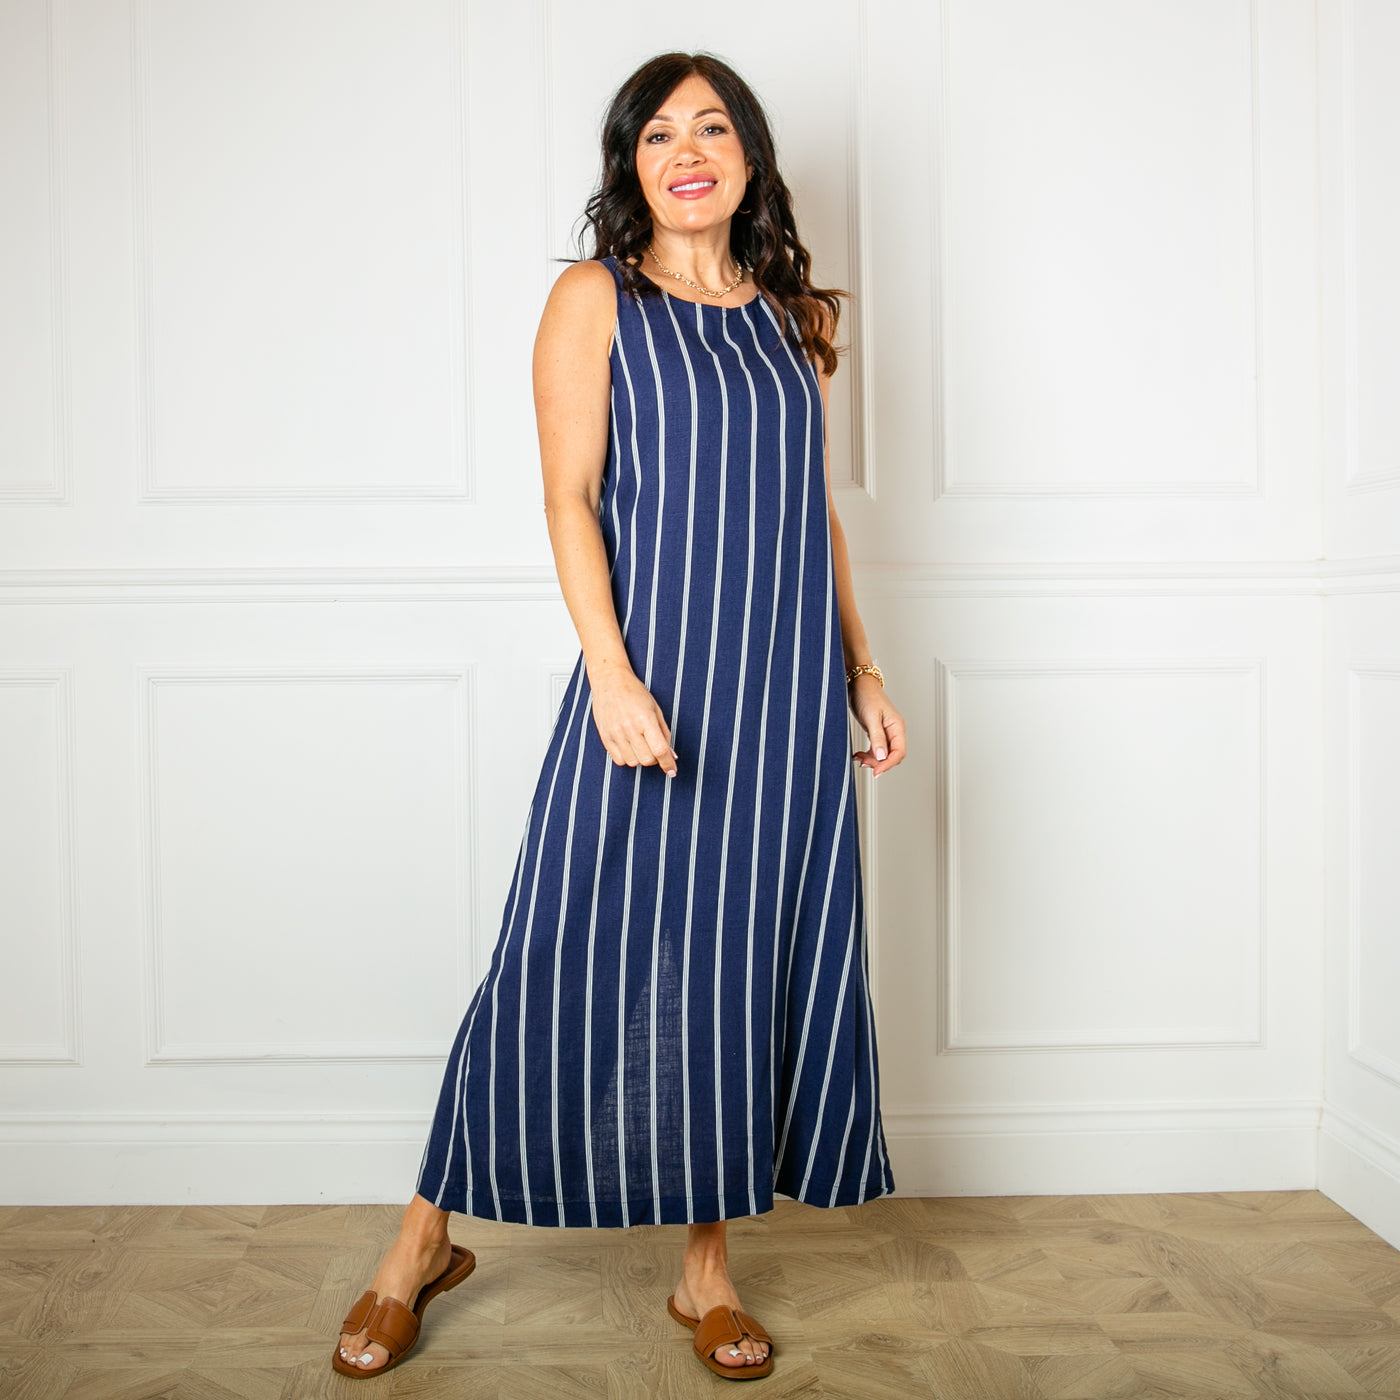 The navy blue Linen Tie Back Maxi Dress, sleeveless with an a-line silhouette and a round neckline